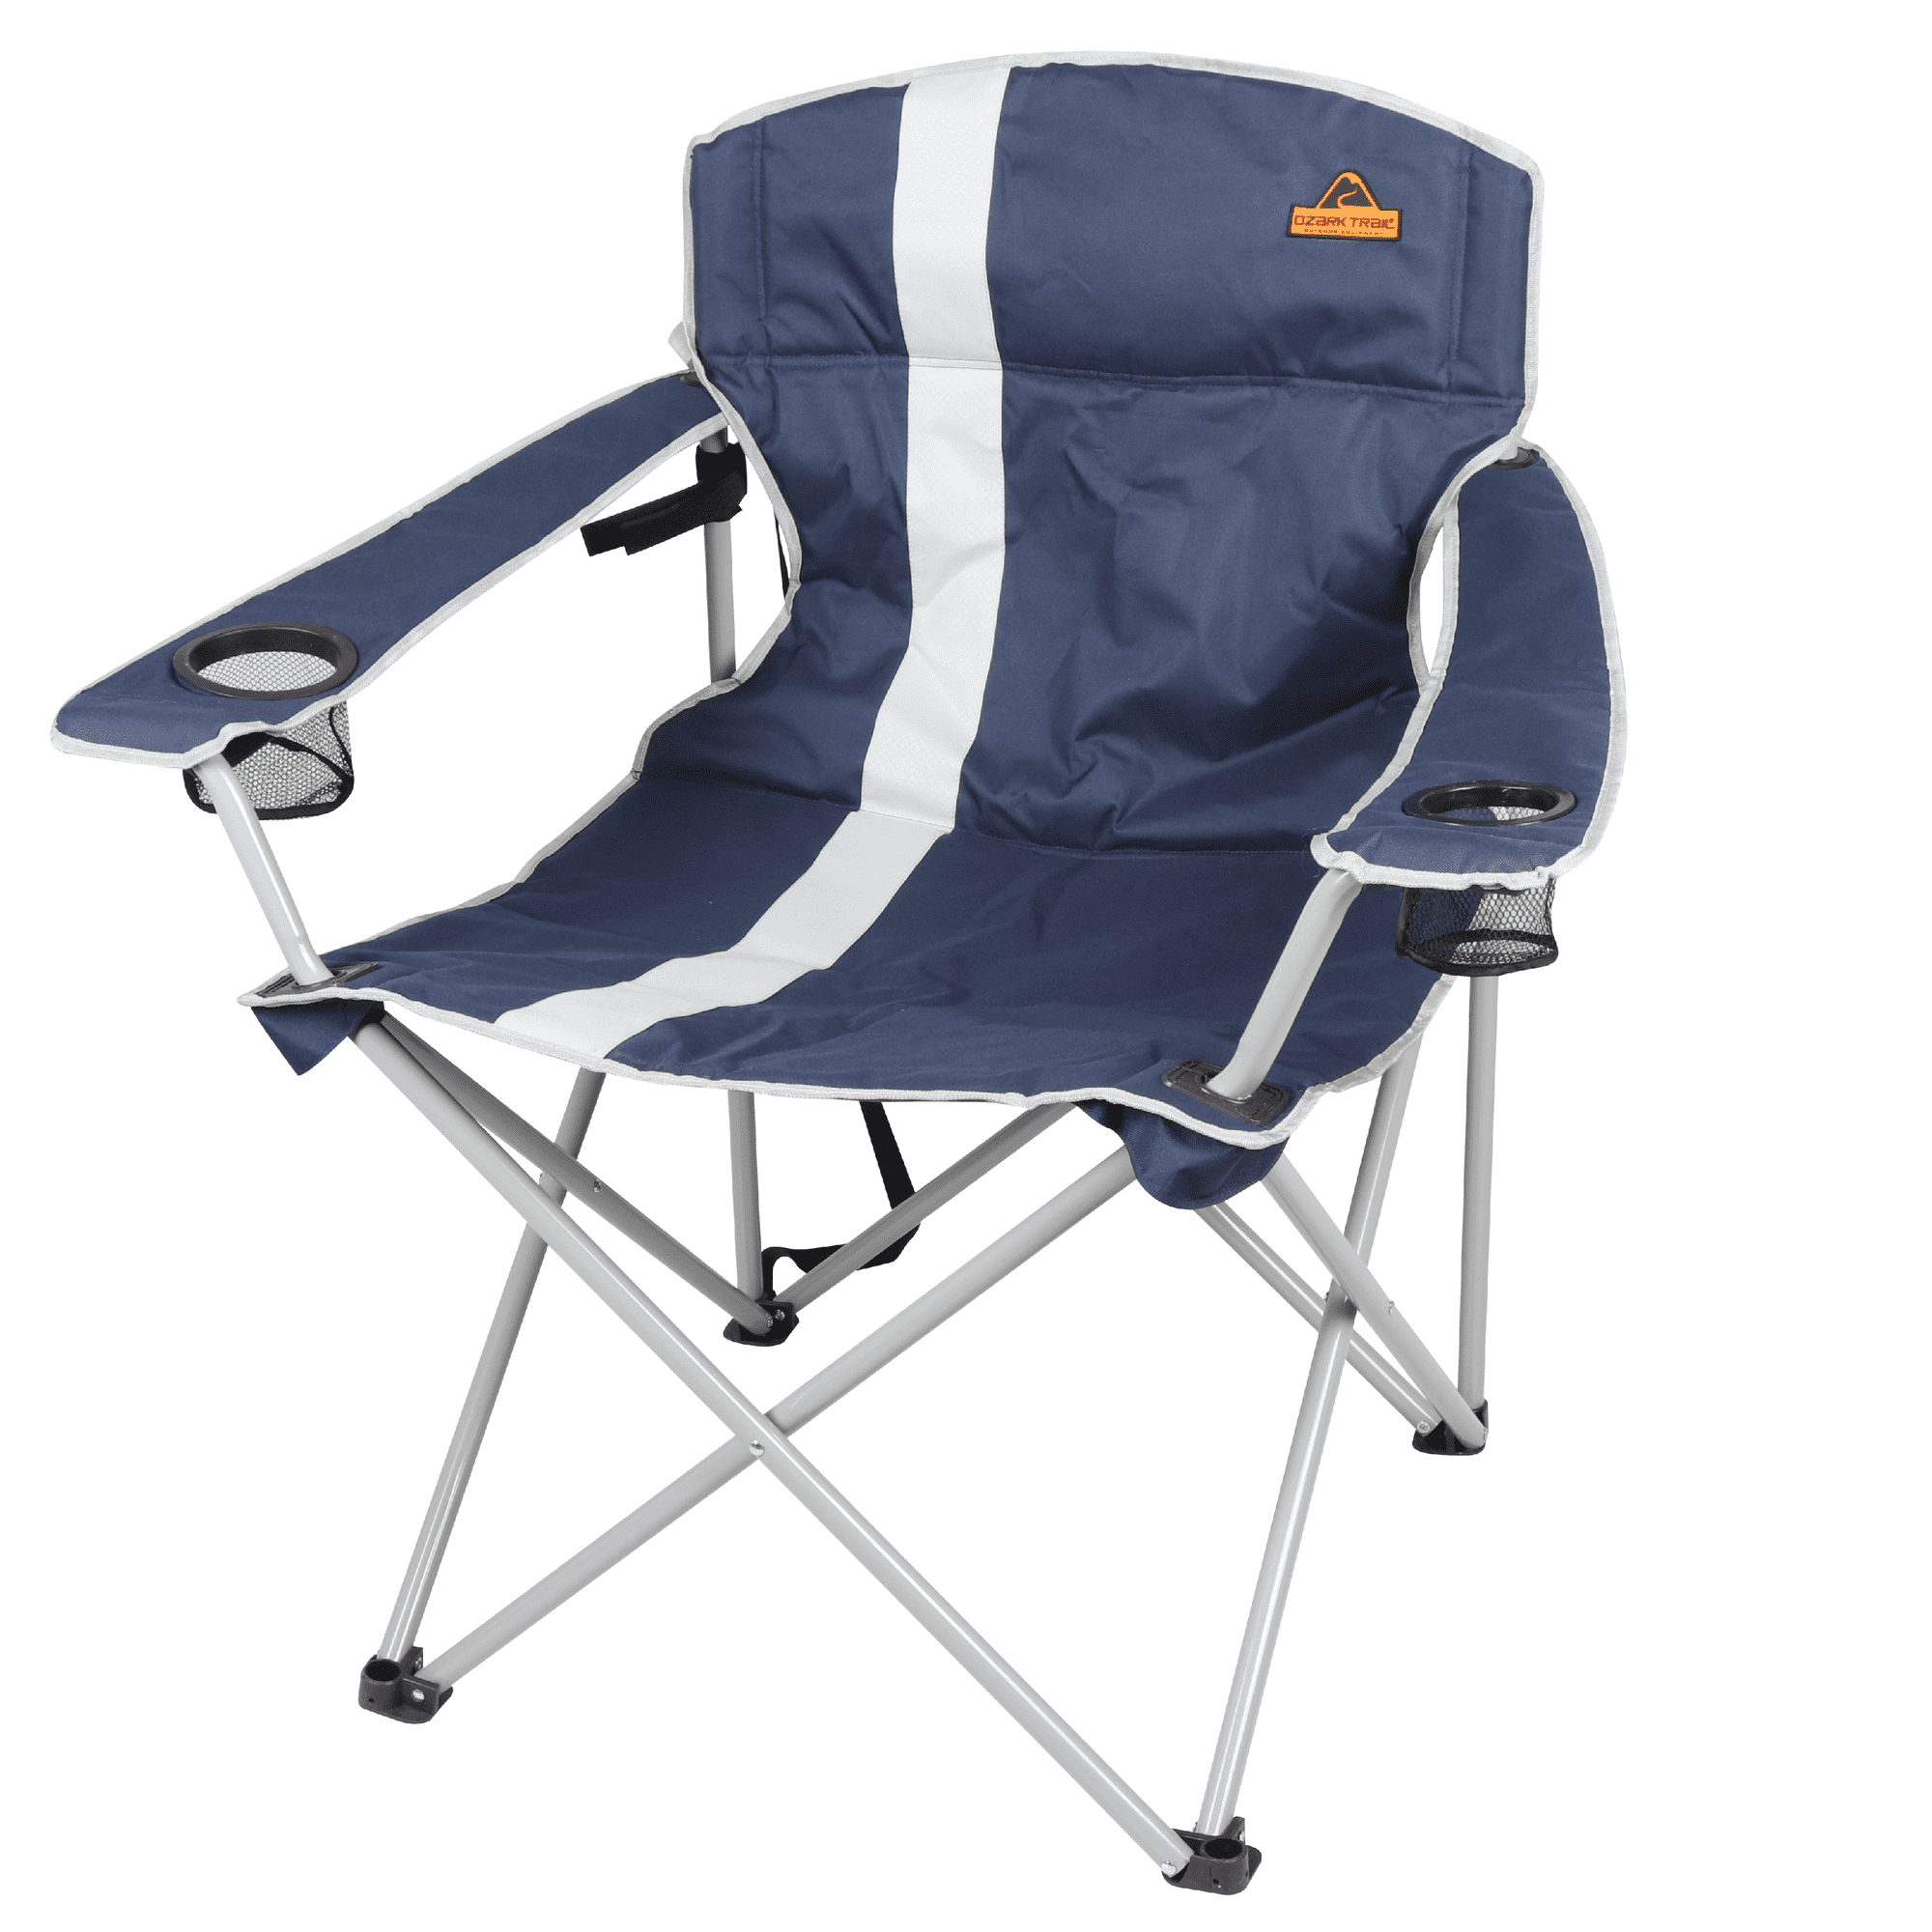 Ozark Trail Big and Tall Chair with Cup Holders, Blue for Outdoo